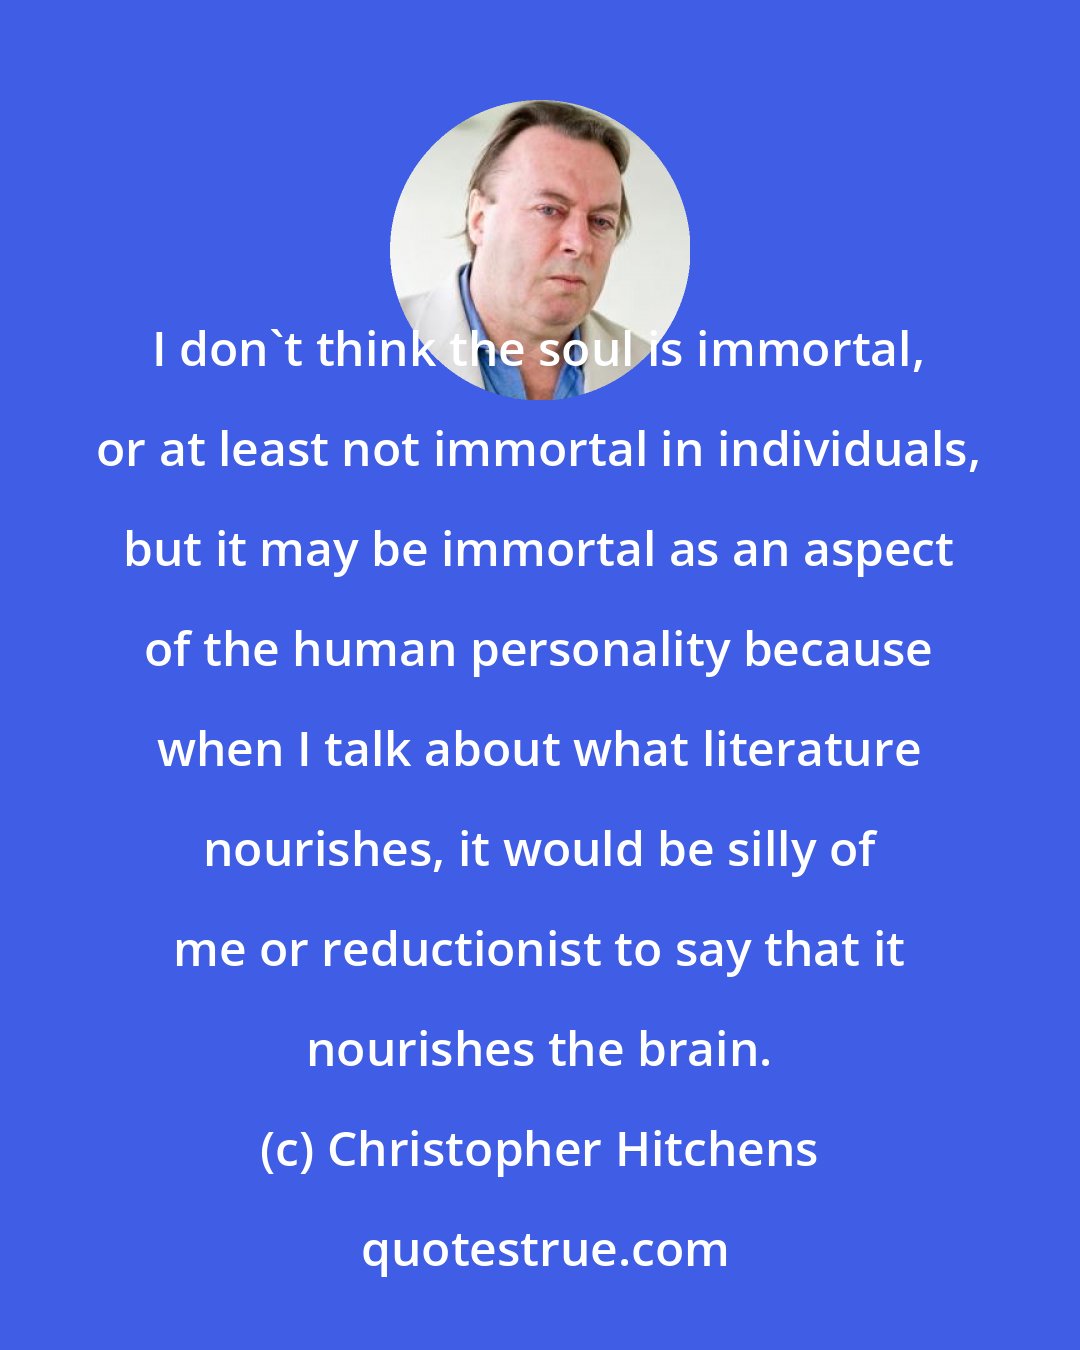 Christopher Hitchens: I don't think the soul is immortal, or at least not immortal in individuals, but it may be immortal as an aspect of the human personality because when I talk about what literature nourishes, it would be silly of me or reductionist to say that it nourishes the brain.